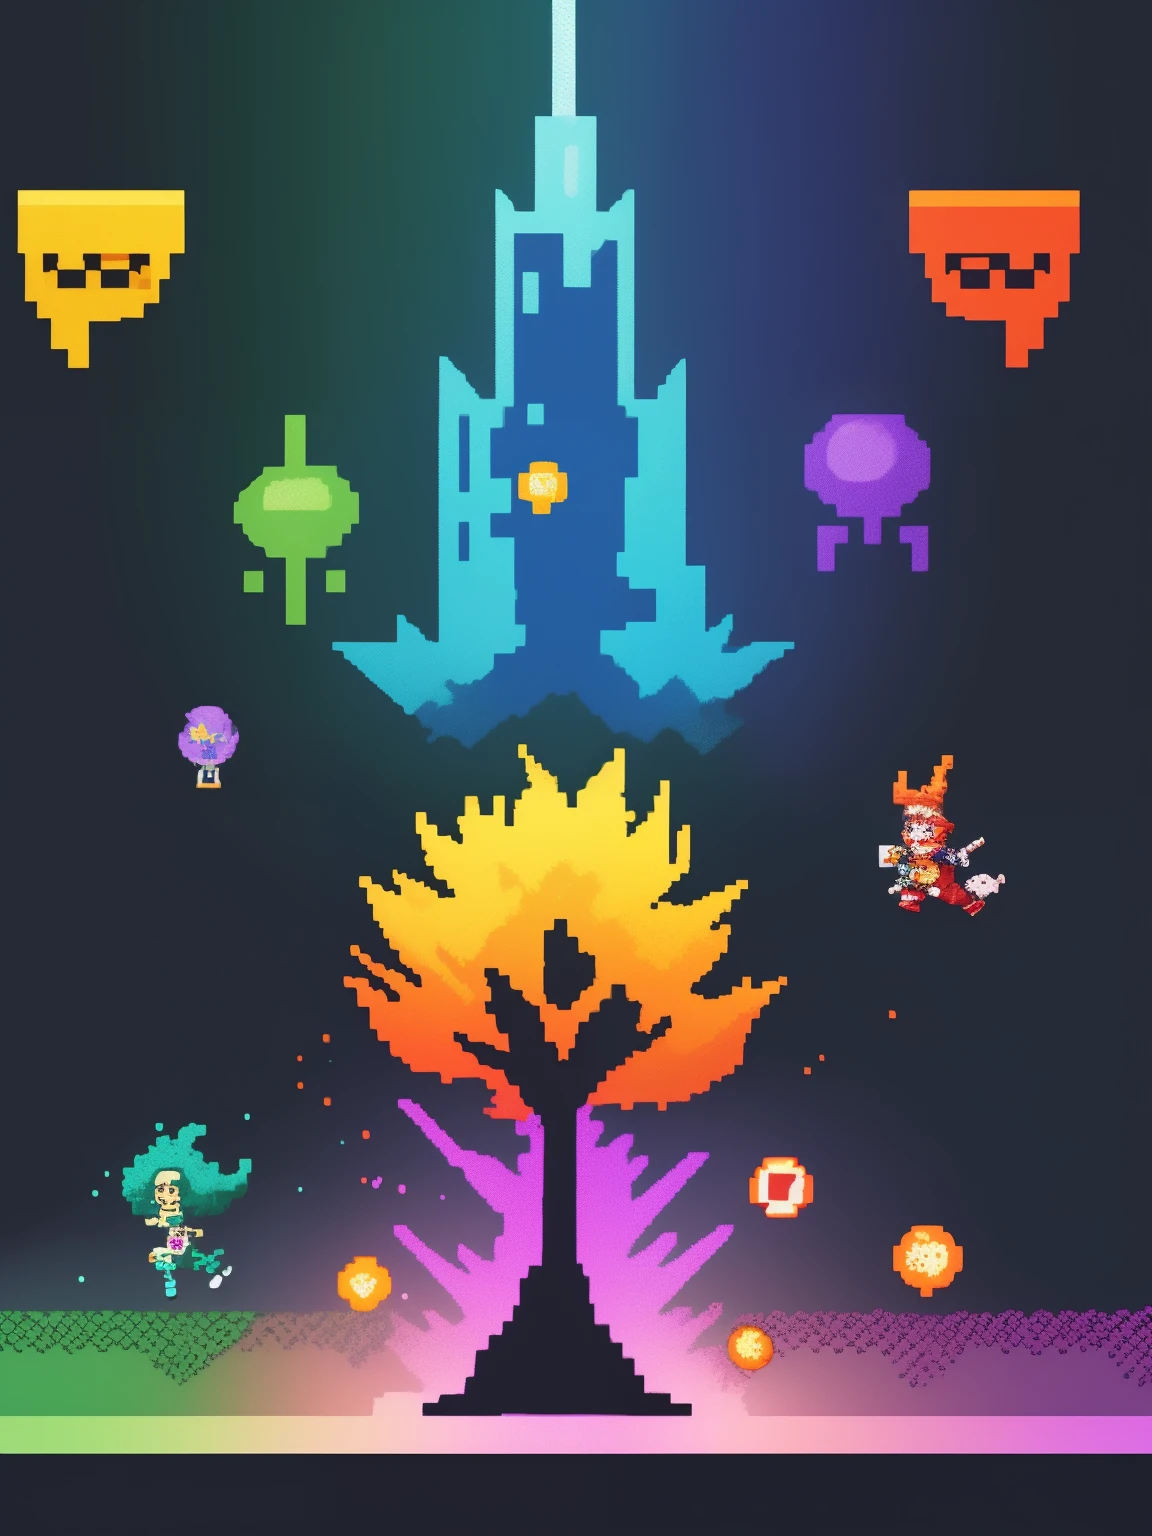 A retro game filled with vibrant pixelated characters, pixel art illustrations featuring nostalgic 8-bit sprites and intricate backgrounds,[best quality,4k,8k,highres,masterpiece:1.2],ultra-detailed gameplay, vibrant colors, with a bright and vivid color palette, [glowing lights], crisp and sharp focus, [nostalgic 8-bit style], [classic arcade cabinet design], [old-school sound effects], [fast-paced action], [retro game controller], [pixelated explosions], [high score board], [time constraints], [challenge stages], [colorful power-ups], [hidden bonus levels], [intense boss battles], [achievement system], [multiplayer option], [unlockable characters and levels], [retro pixel art animations], [classic 2D sidescroller gameplay], [retro-inspired music].